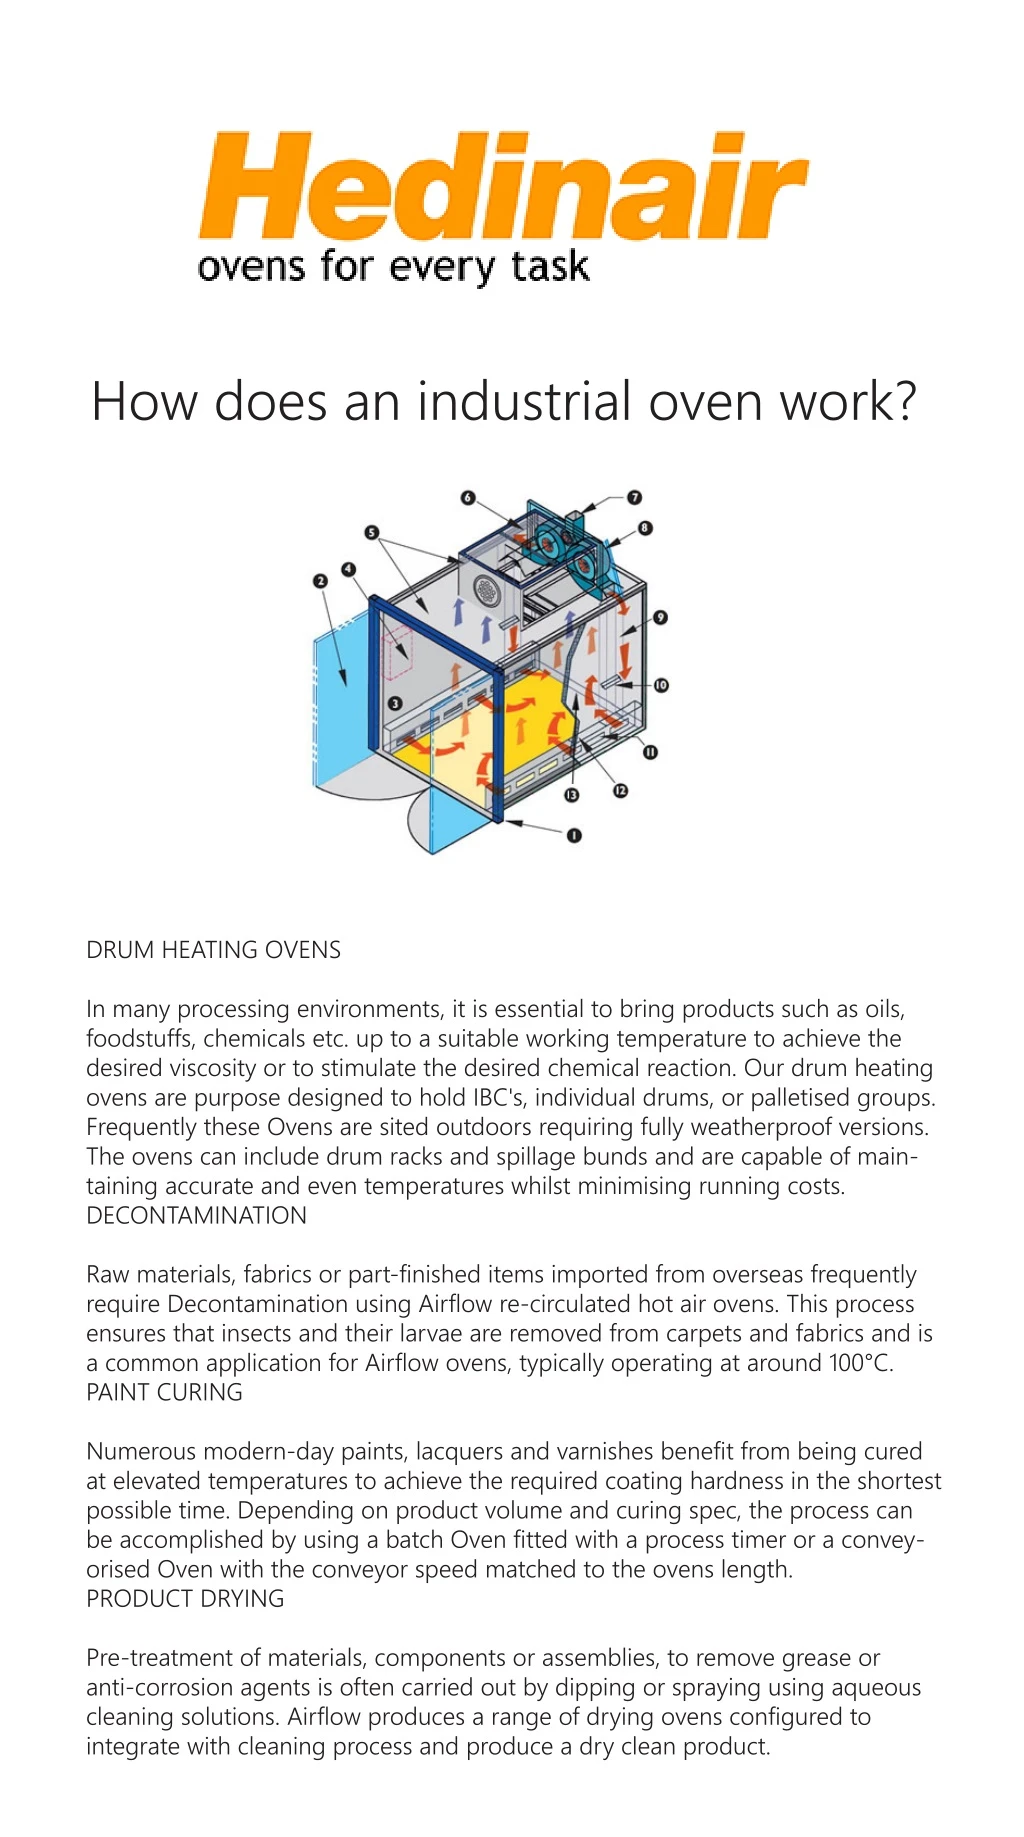 how does an industrial oven work